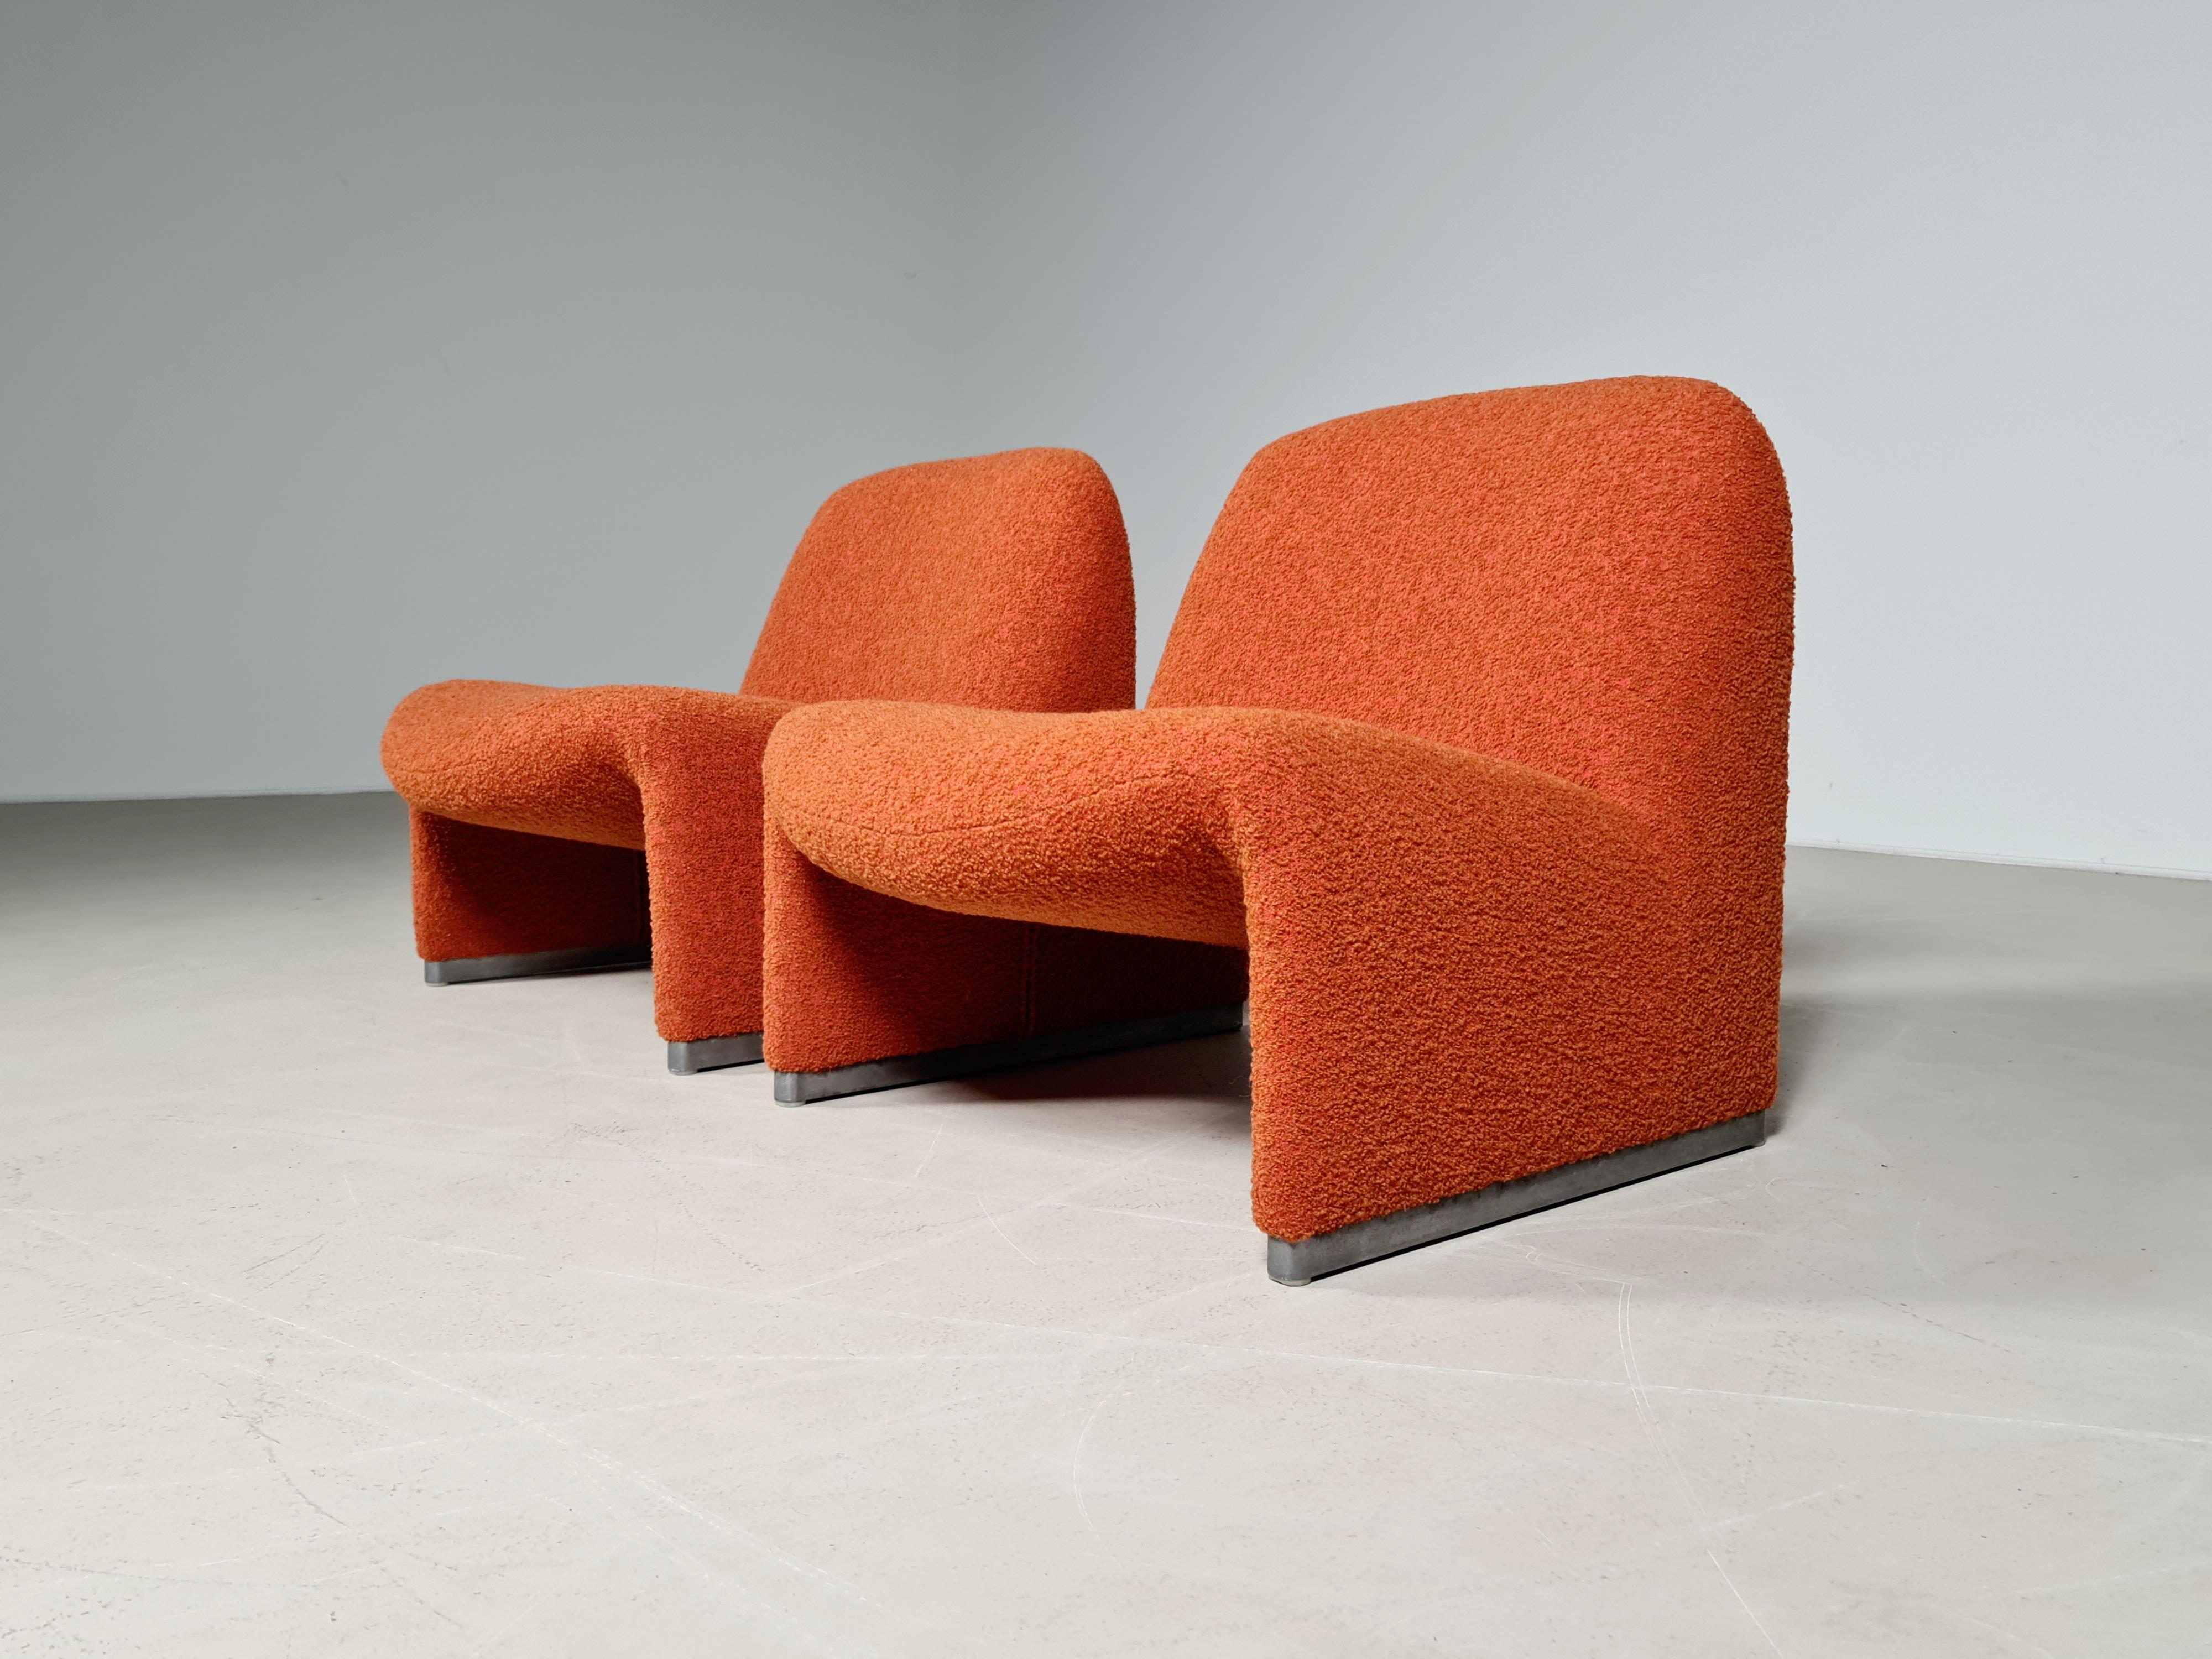 Italian Set of 2 Alky Chairs by Giancarlo Piretti for Castelli, 1970s